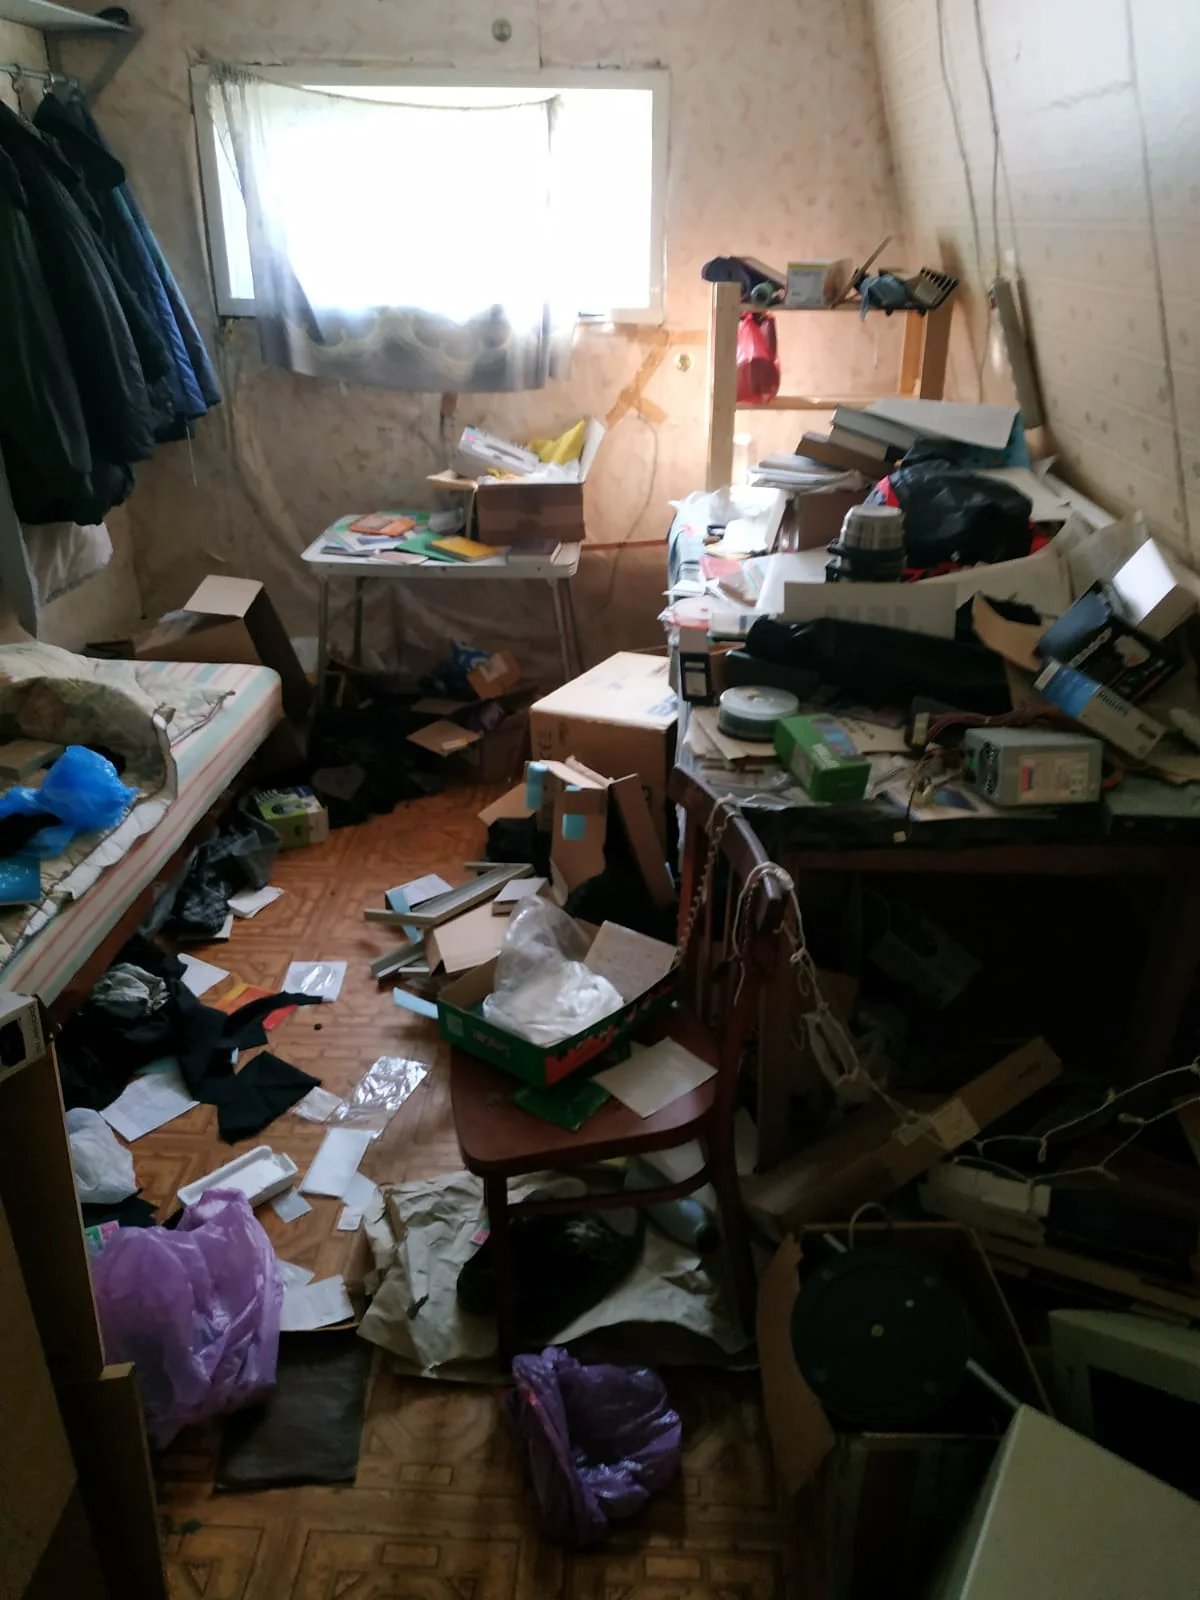 The priest’s room after the police search. Photo provided exclusively to Novaya-Europe